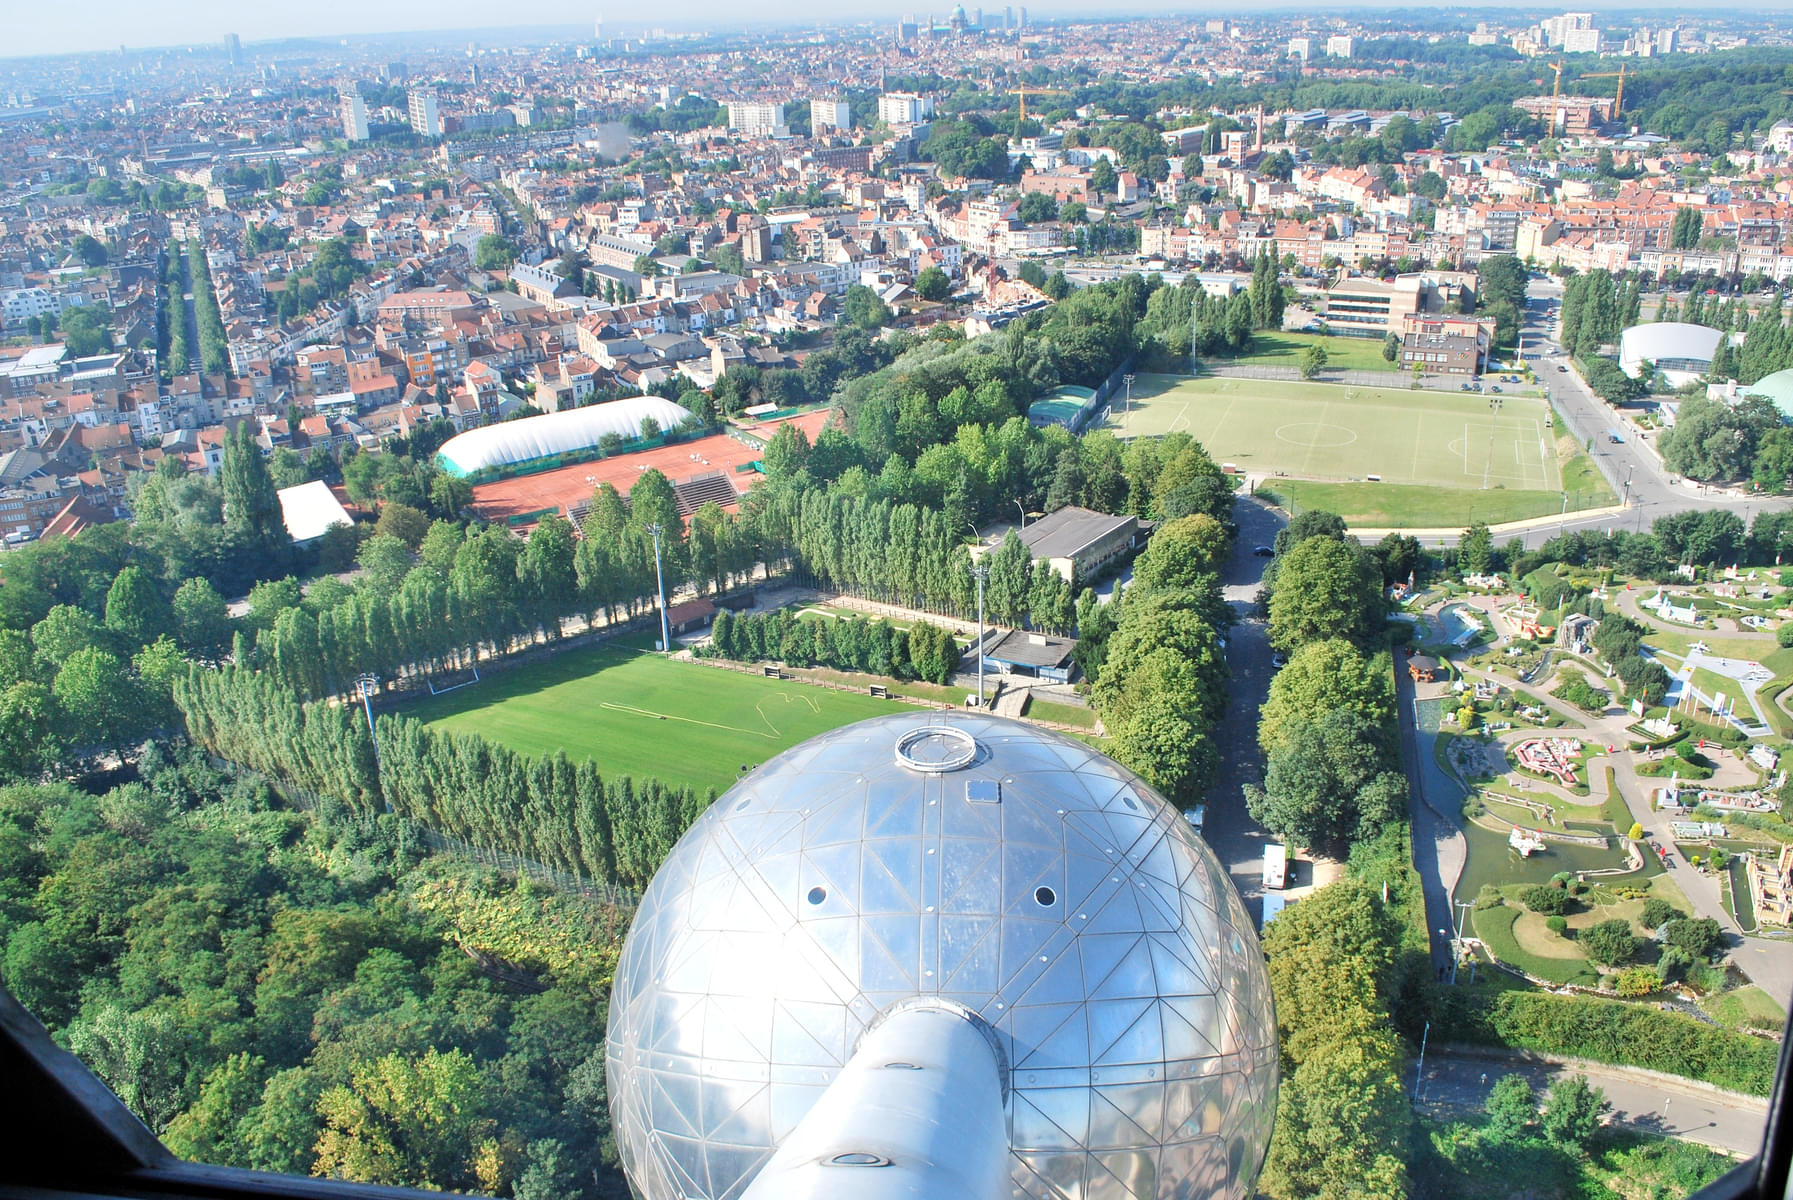 Explore the famous Atomium, offering an insight into the royal world of Brussels